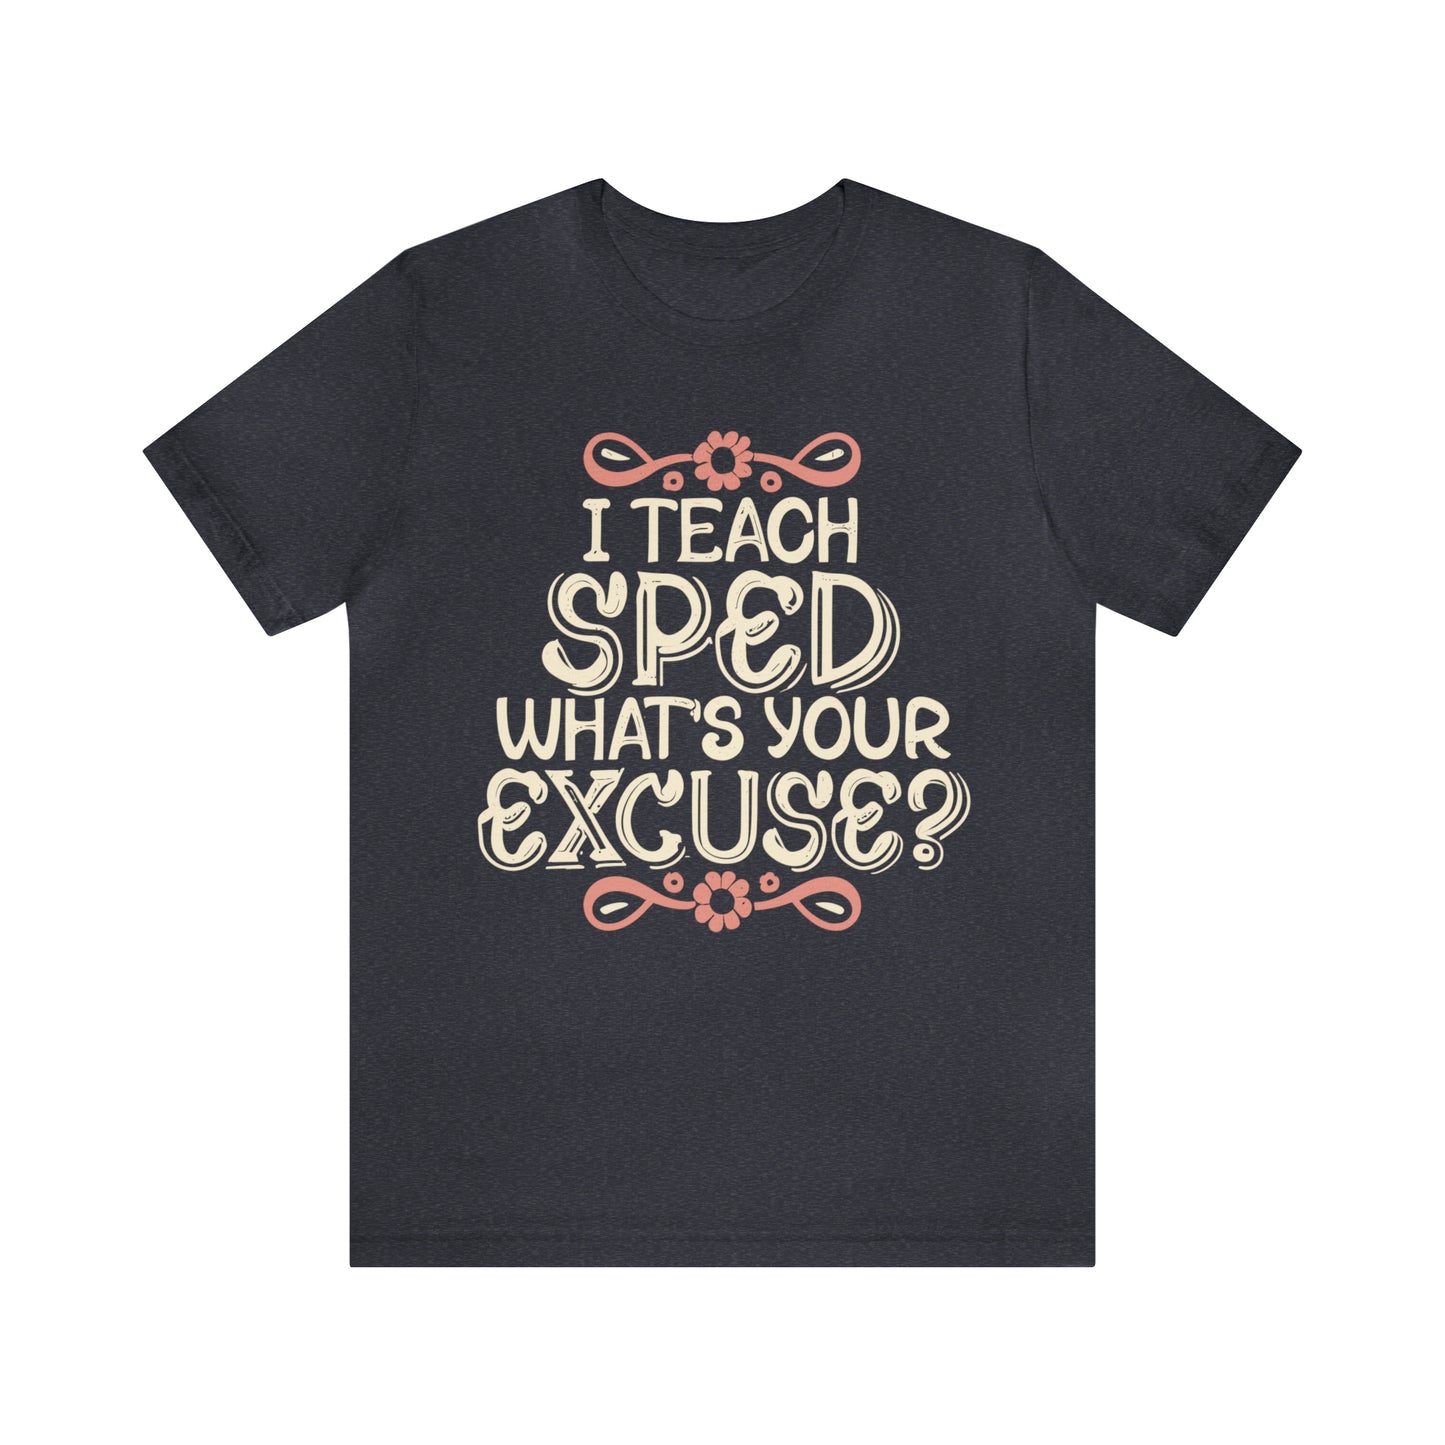 Special Ed Teacher Tshirt - "I Teach SPED - What's Your Excuse"